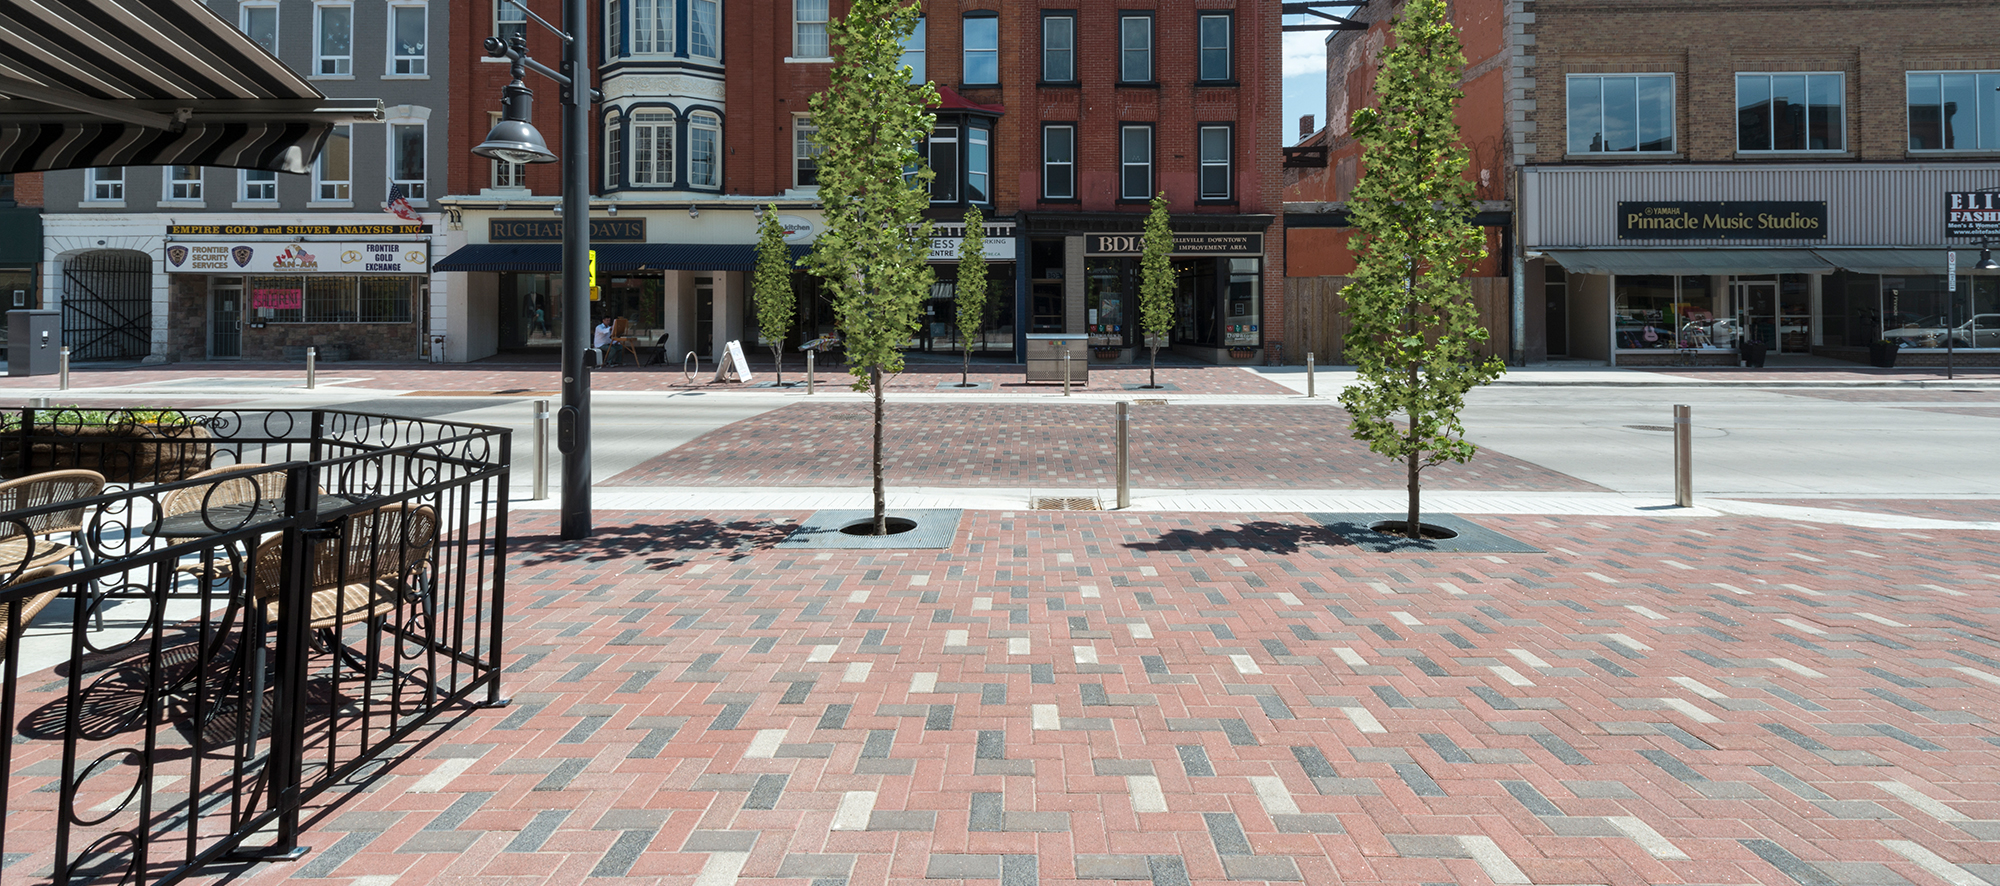 An old-fashioned streetscape with walkways and pedestrian areas made from multicolor Series pavers in a herringbone pattern.